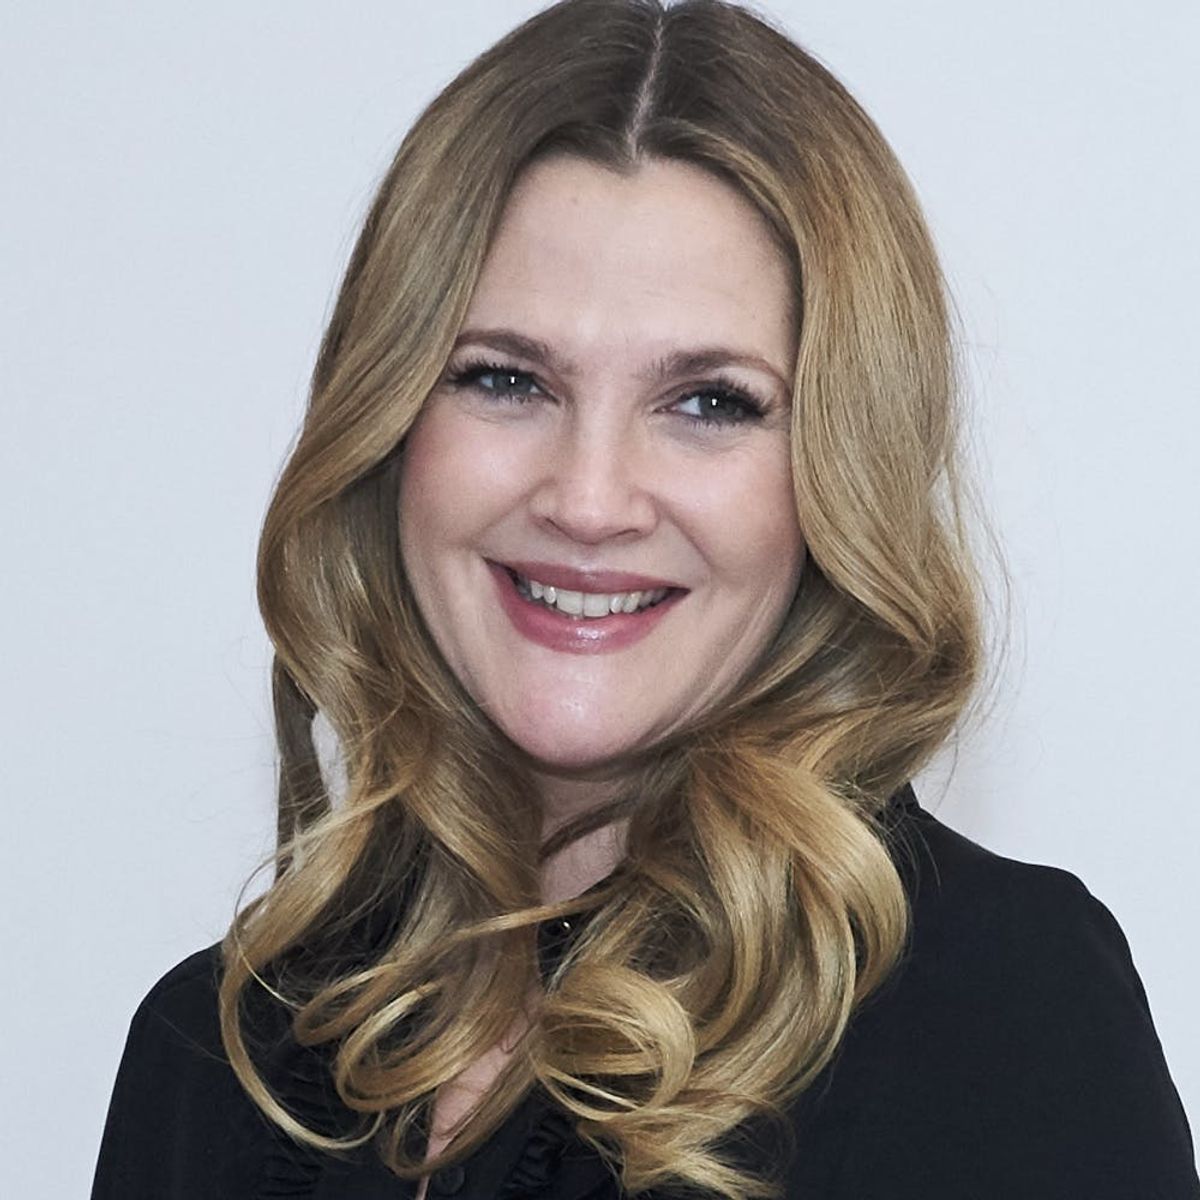 Drew Barrymore’s Teeth Whitening Hack Costs Less than $20